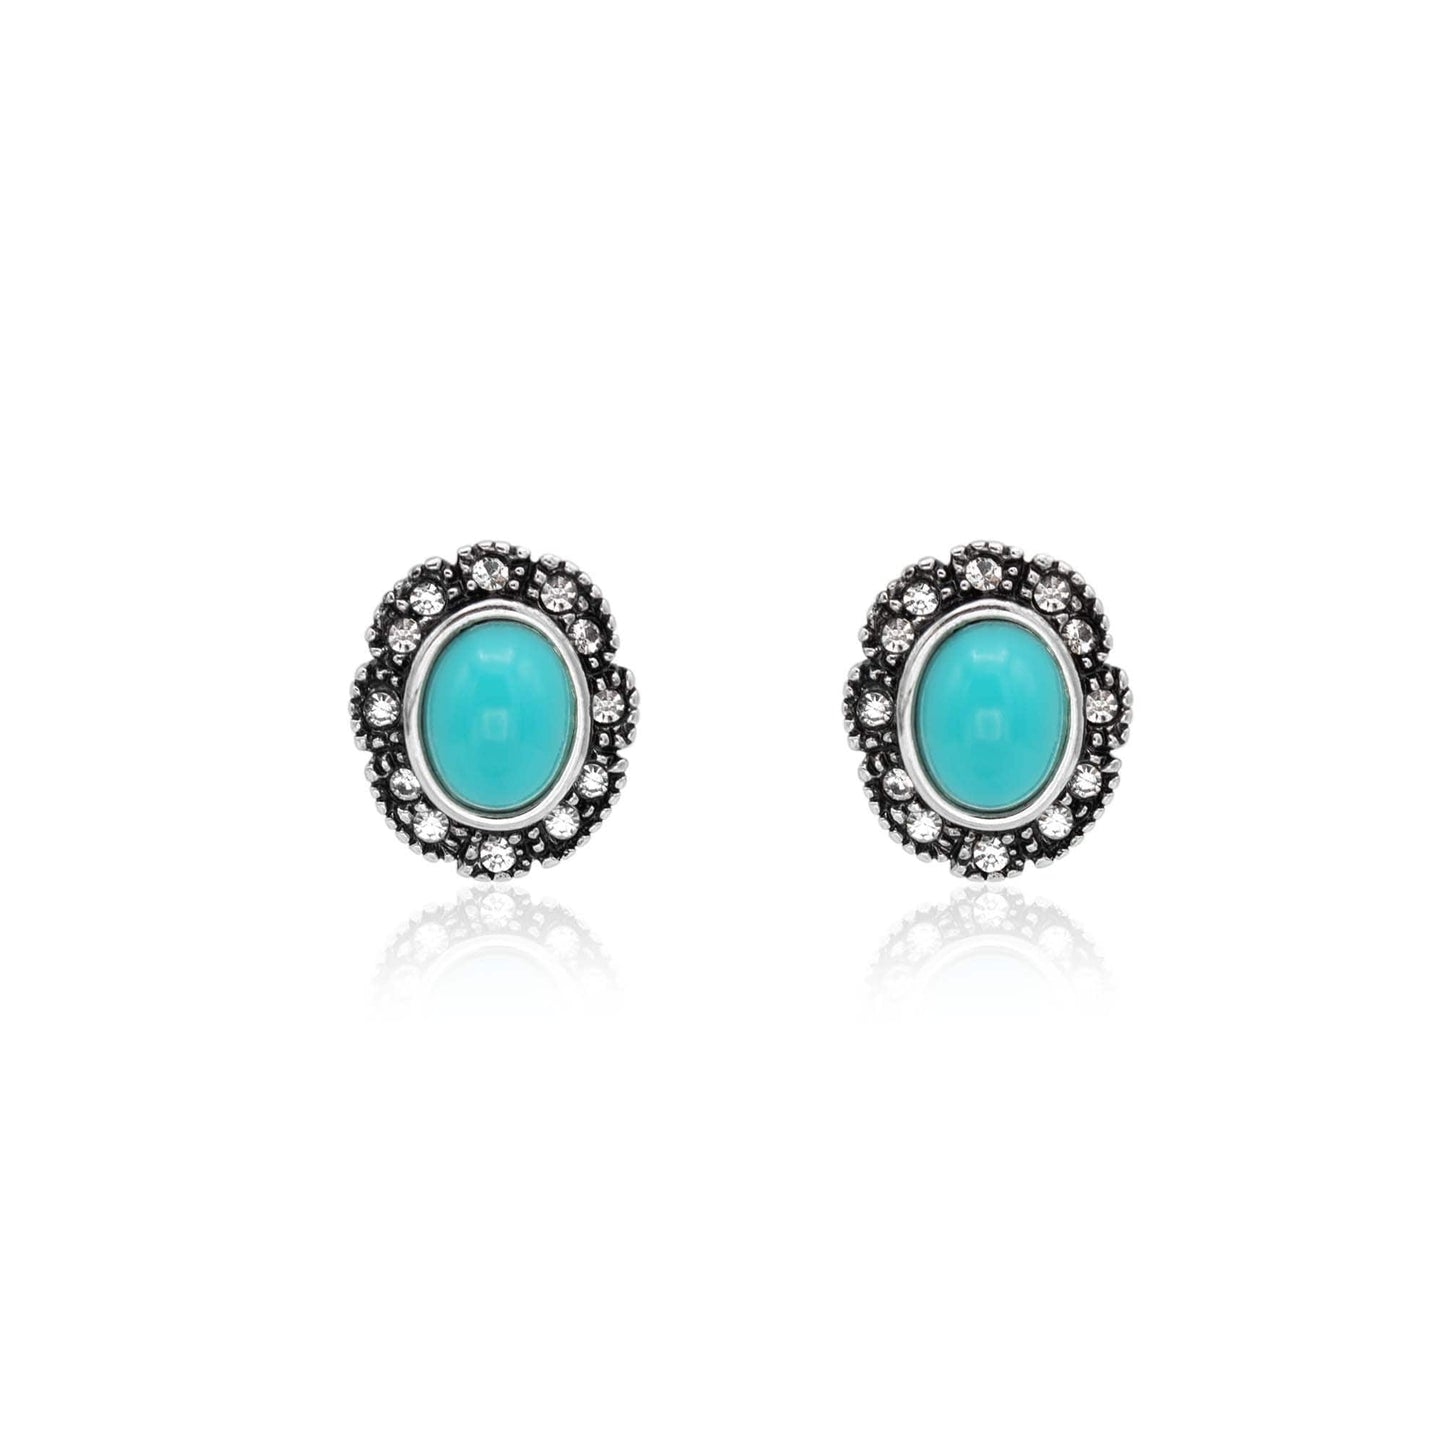 Vintage Turquoise Clear Austrian Crystal Post Earrings Antique White Gold Silver Plated Womans Handmade Jewlery E2425-TQ - Limited Stock